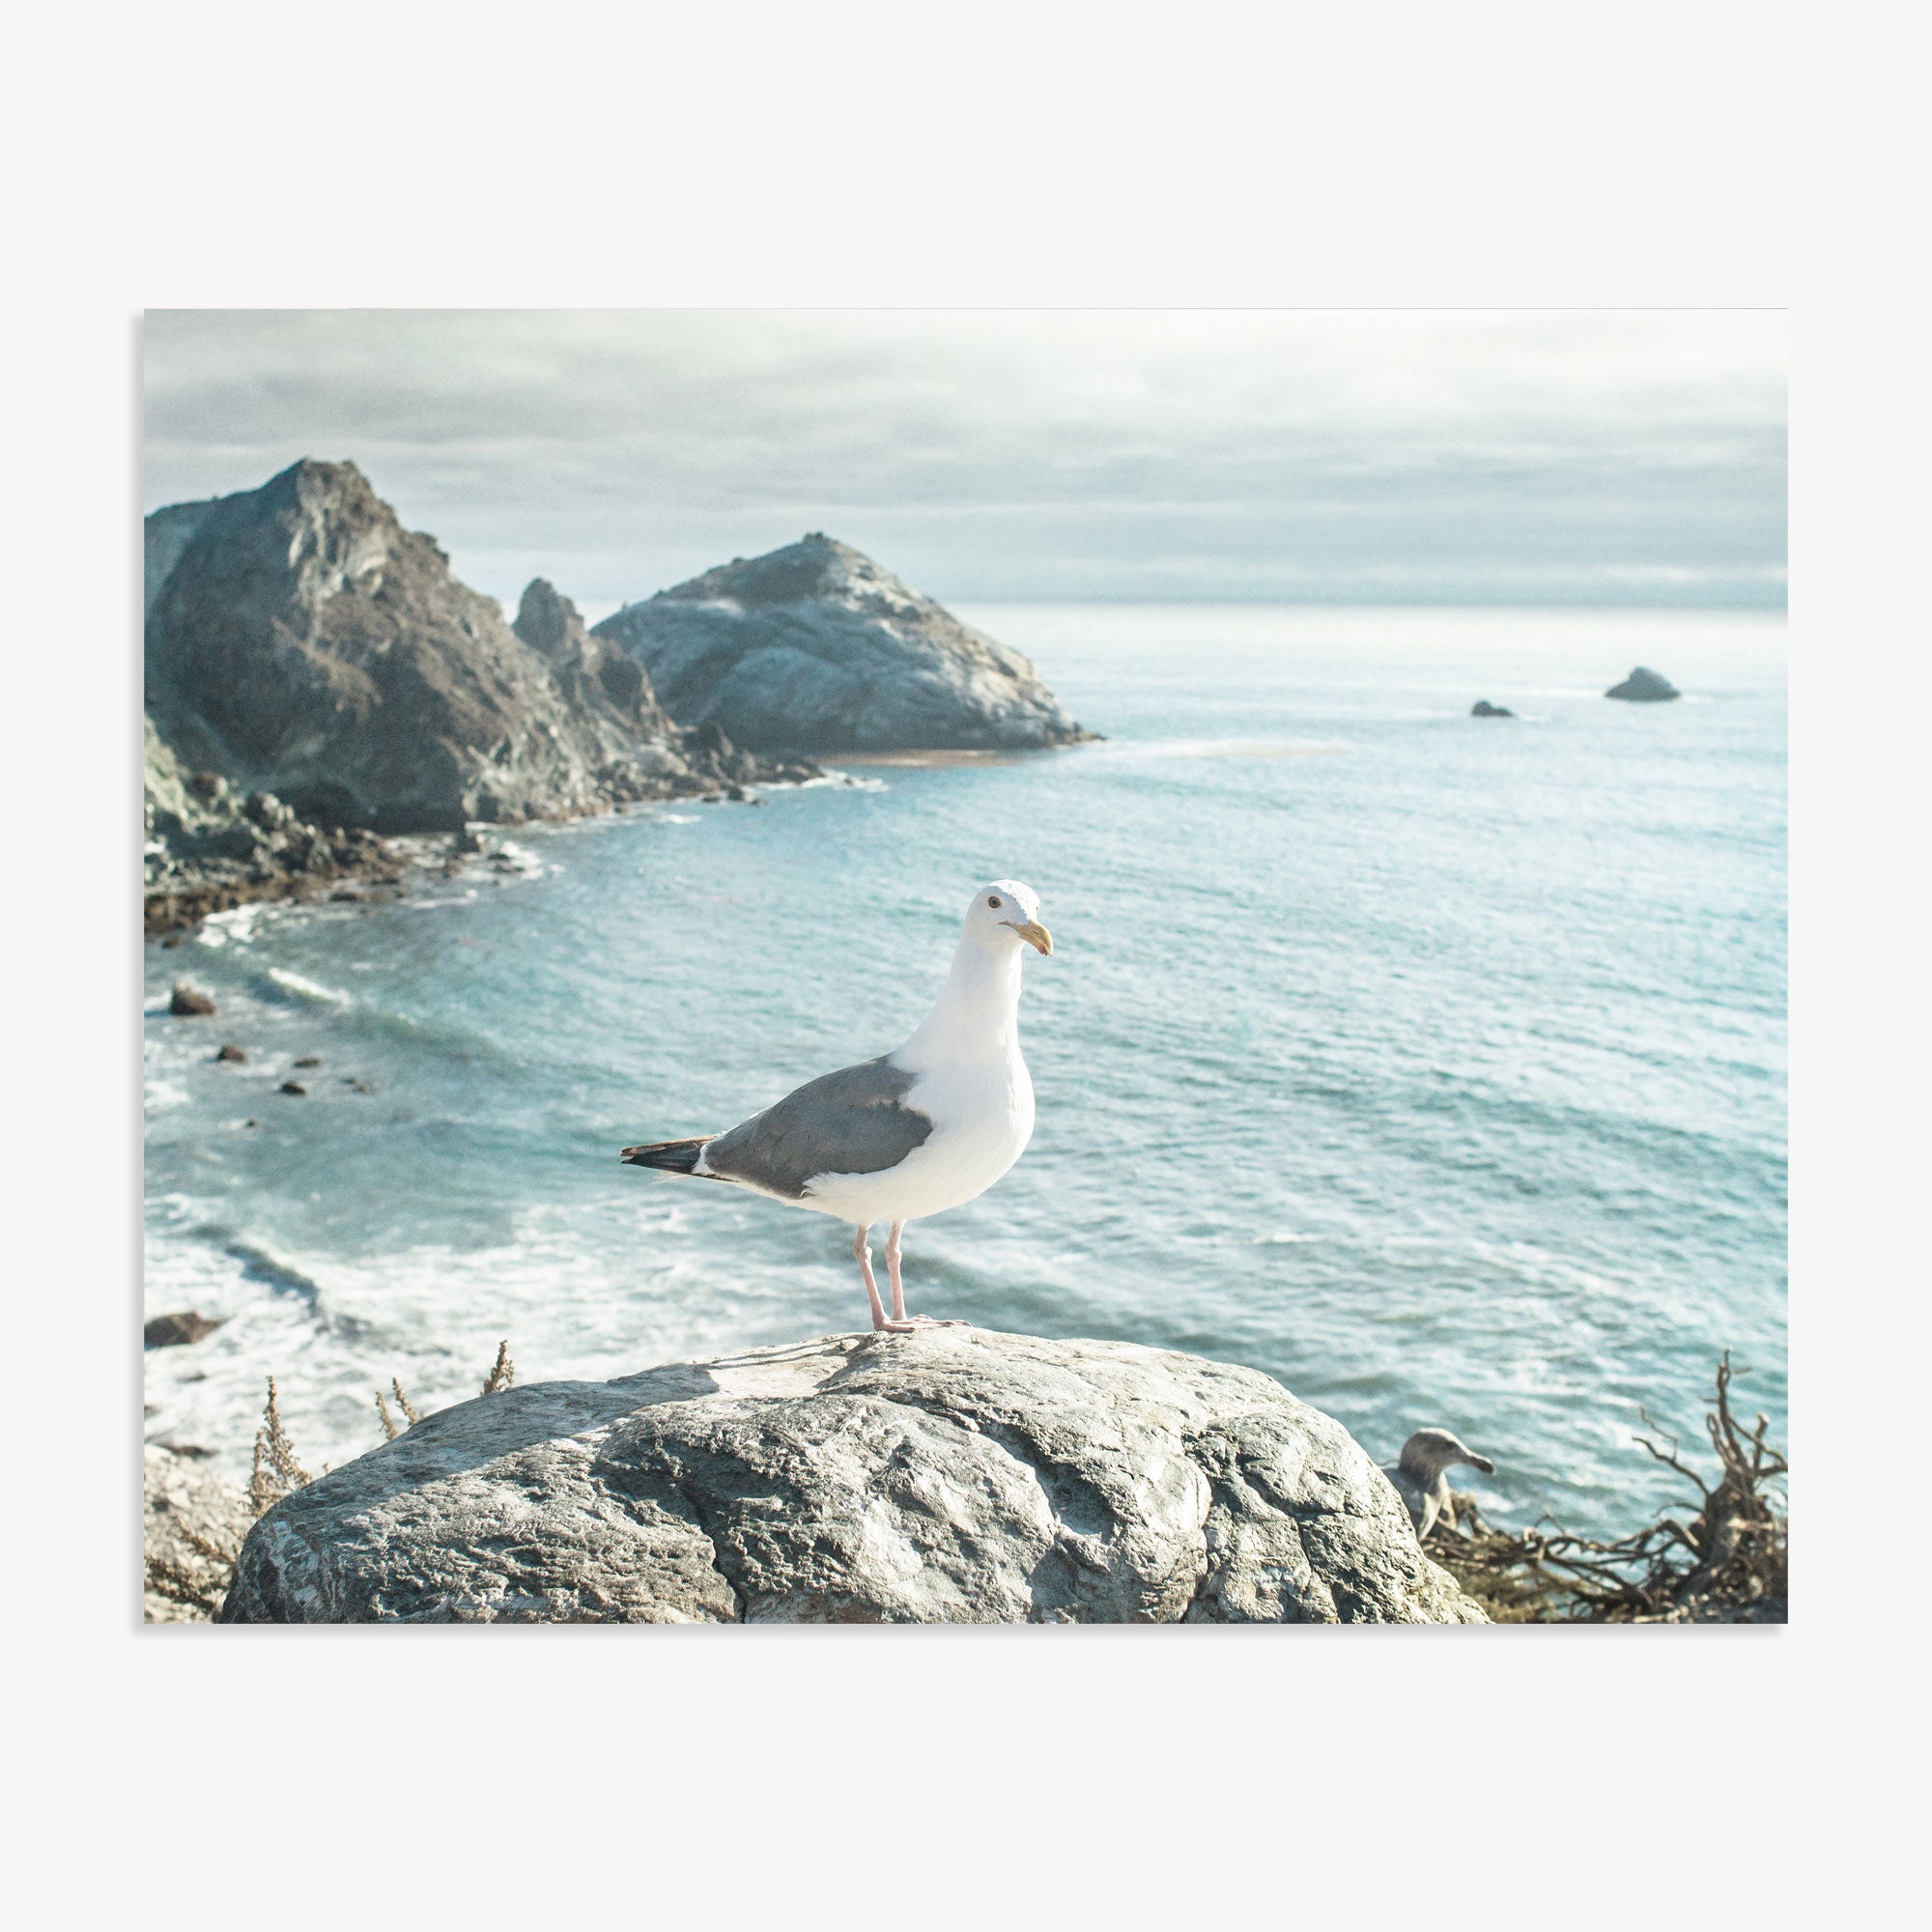 A seagull stands on a rocky ledge overlooking the serene coastline of Offley Green with cliffs and the calm ocean under a soft sky.